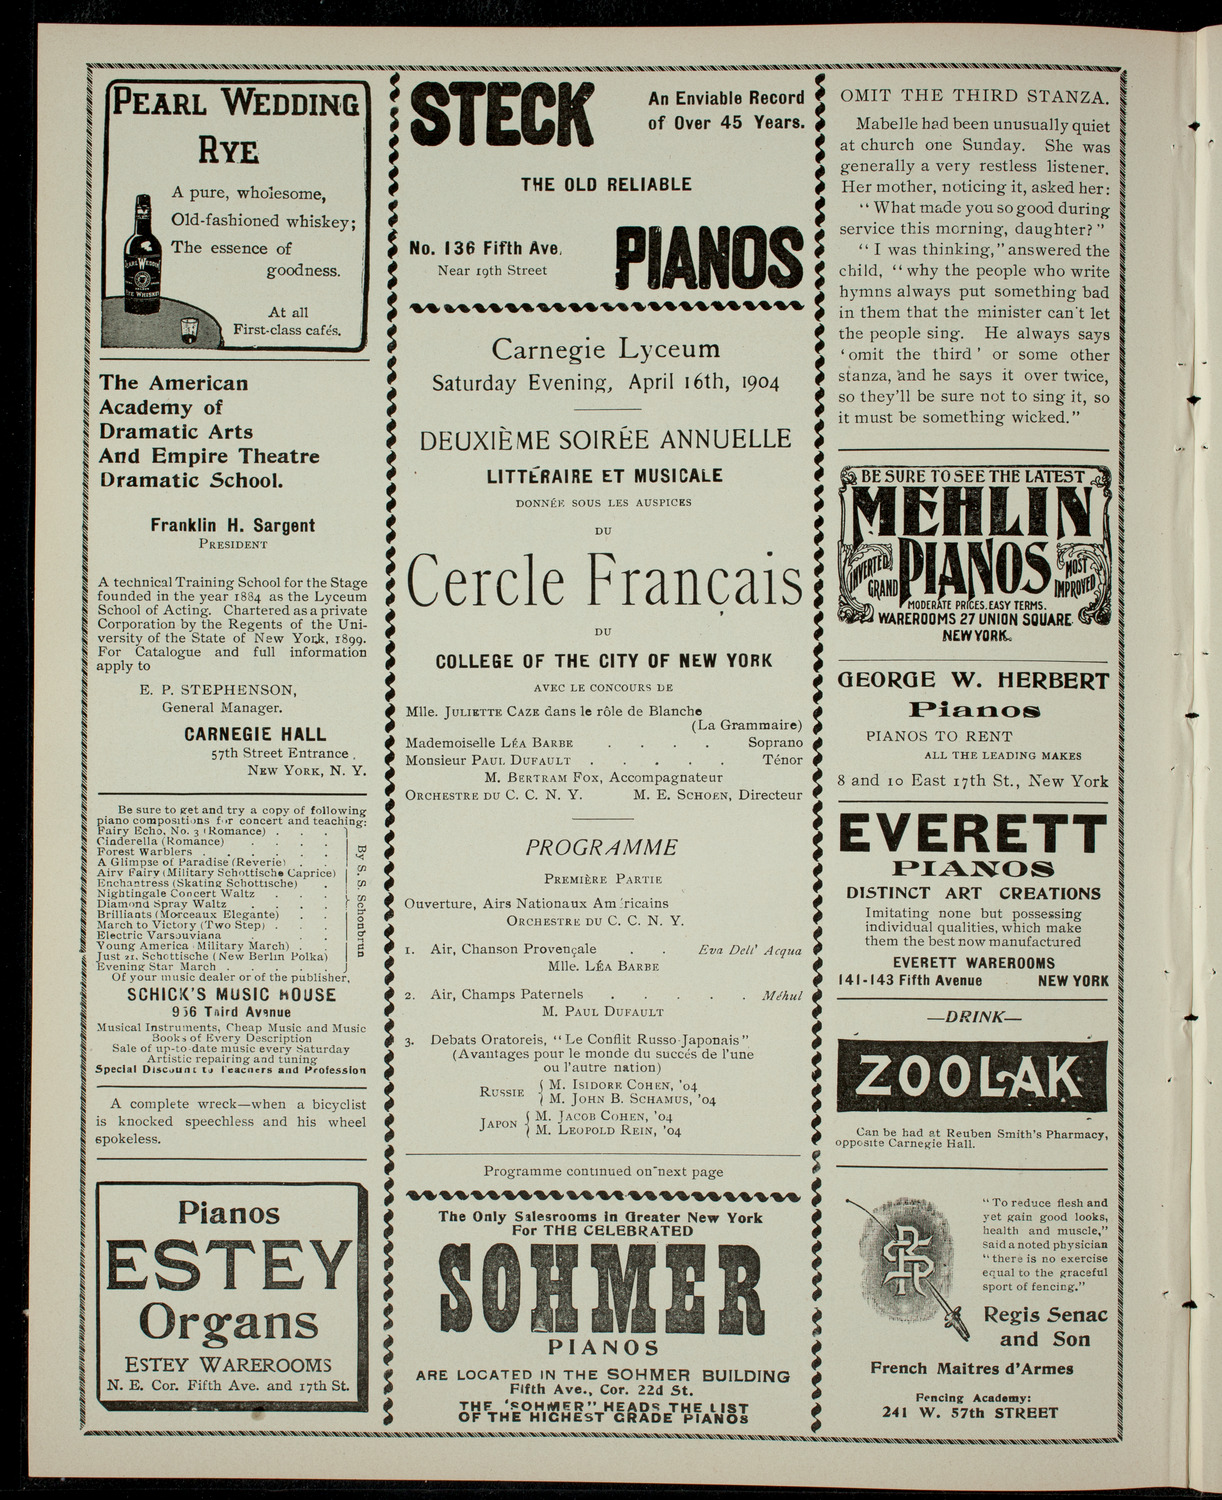 Cercle Francais of the College of the City of New York, April 16, 1904, program page 2